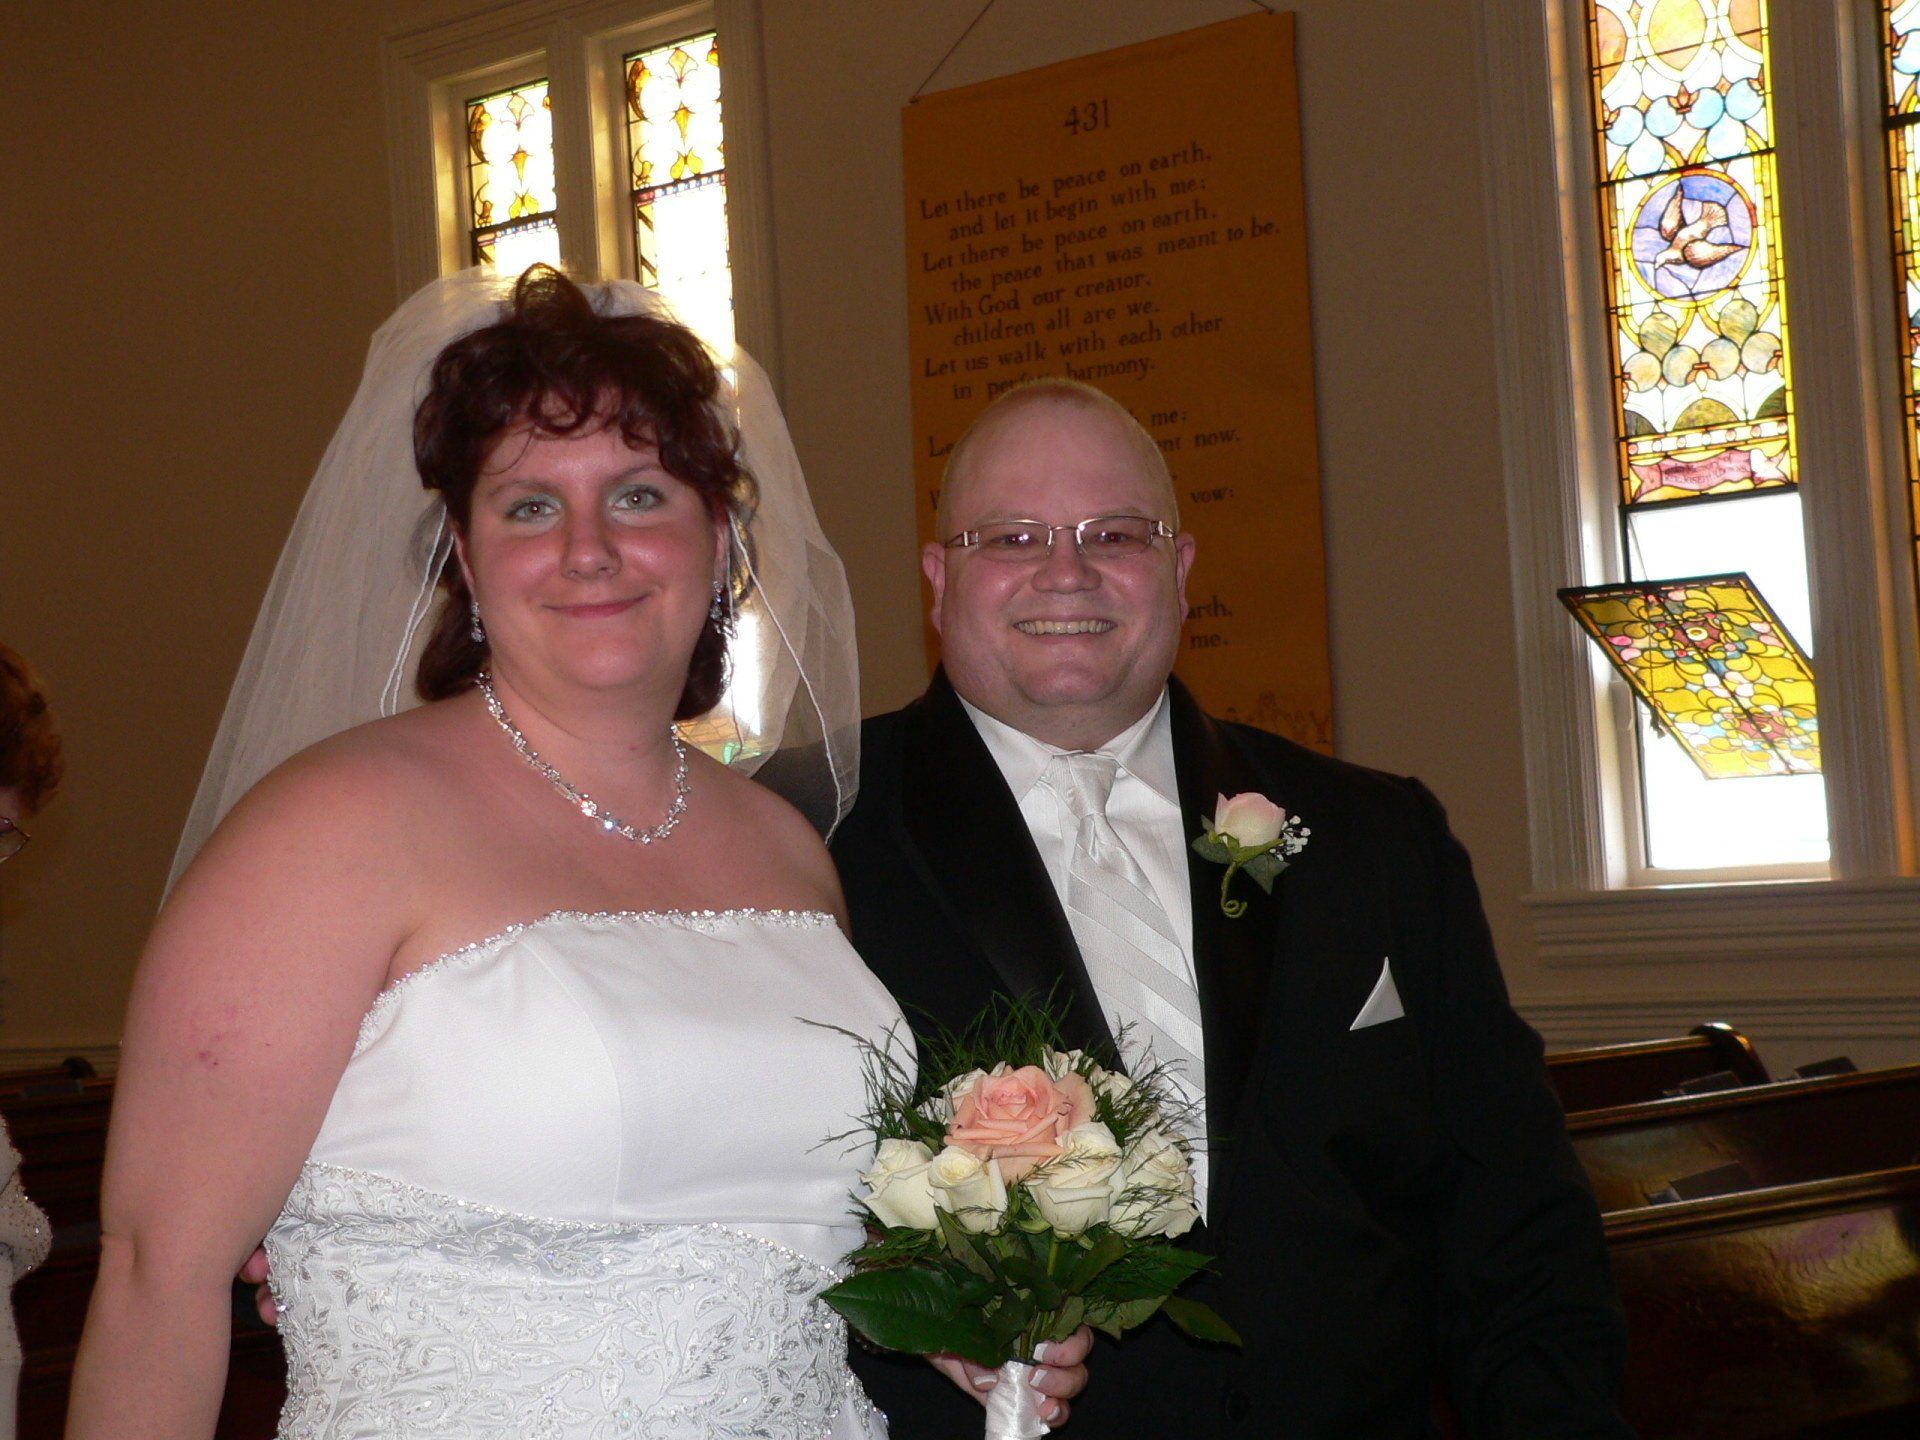 wedding bride and groom at Martel Roberge Function Center, Rollinsford, New Hampshire